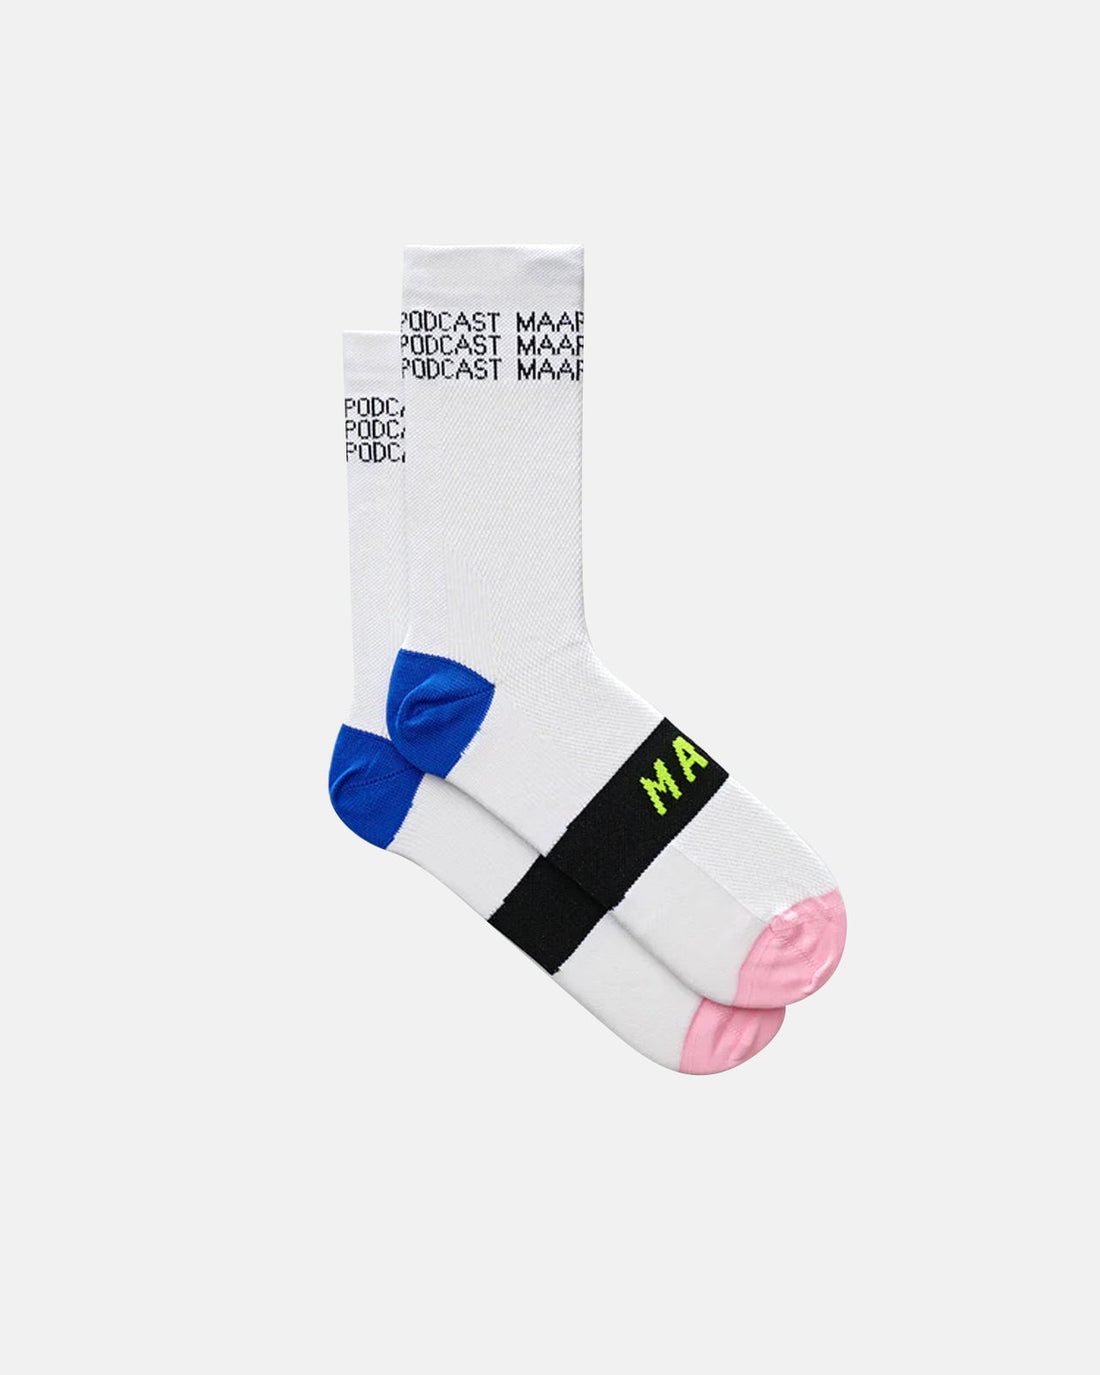 x The Cycling Podcast Sock - MAAP